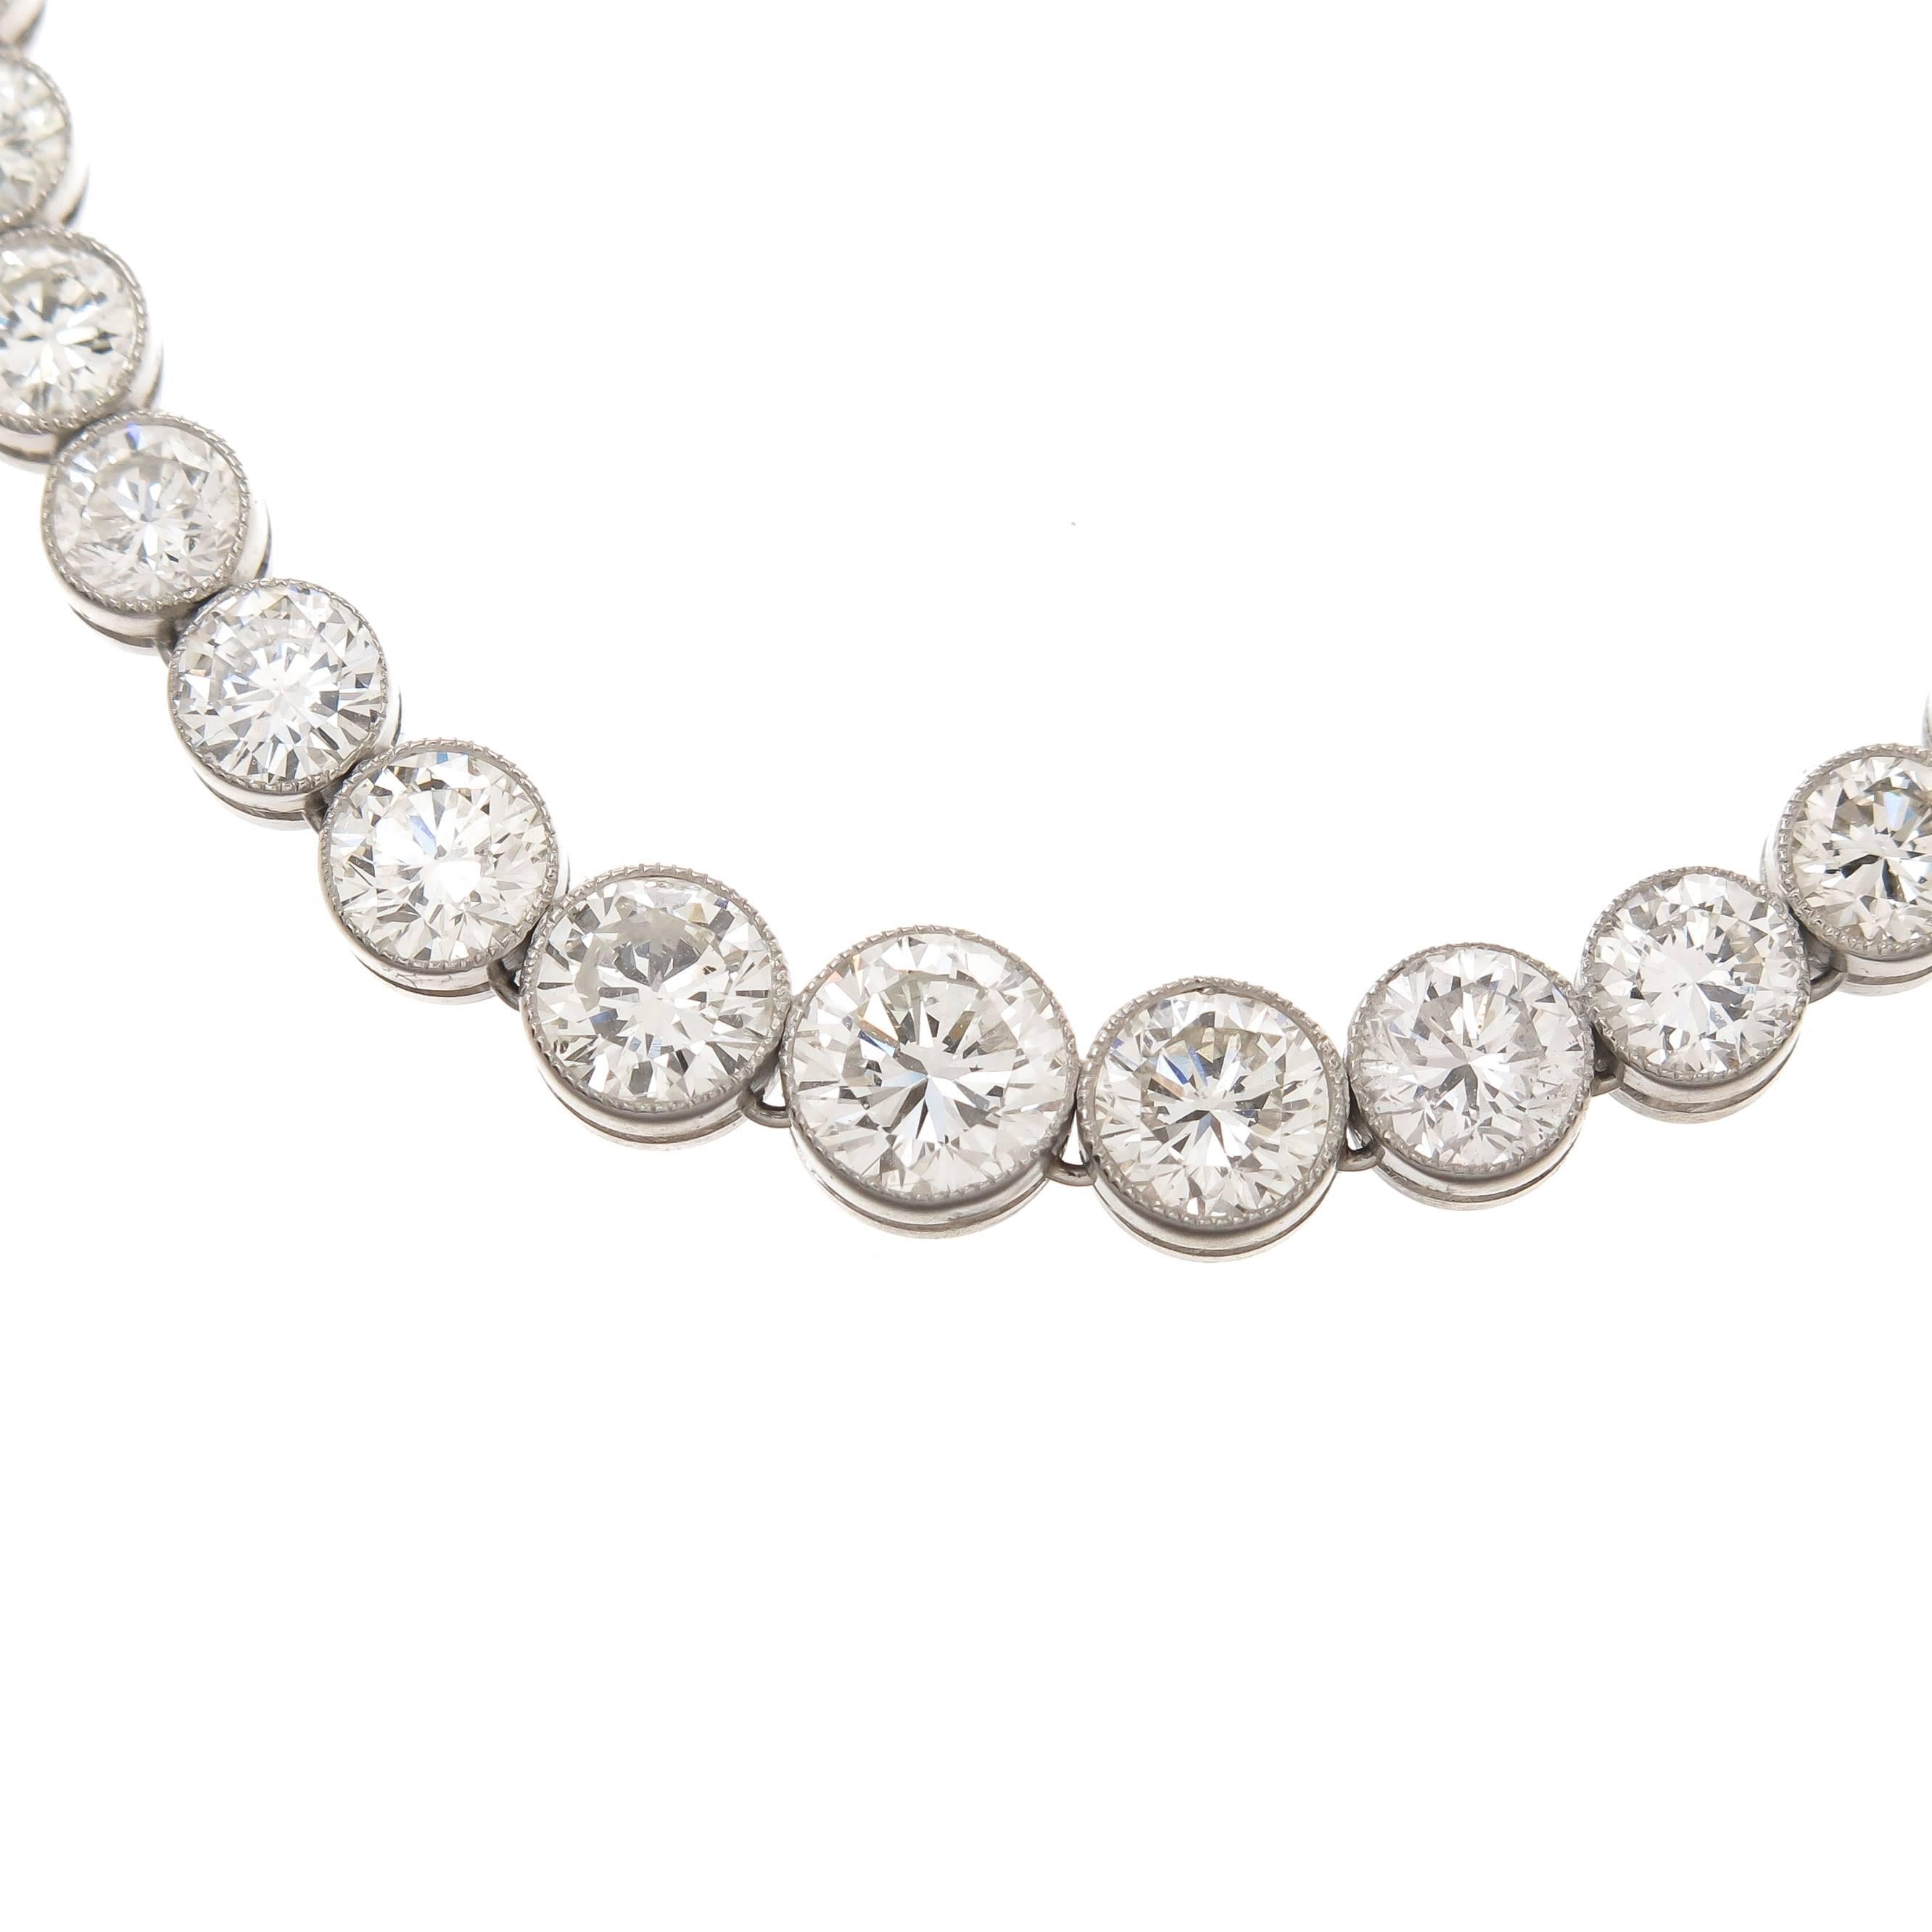 Circa 2010 Platinum Riviere Necklace set with 11. 24 Carats of Old Mine, European and ingle cut Diamonds, Bezel settings with a Millegrain edge, the diamonds graduate in size from .05 Carat to the largest stone of 3/4 Carat. The Diamonds all grade